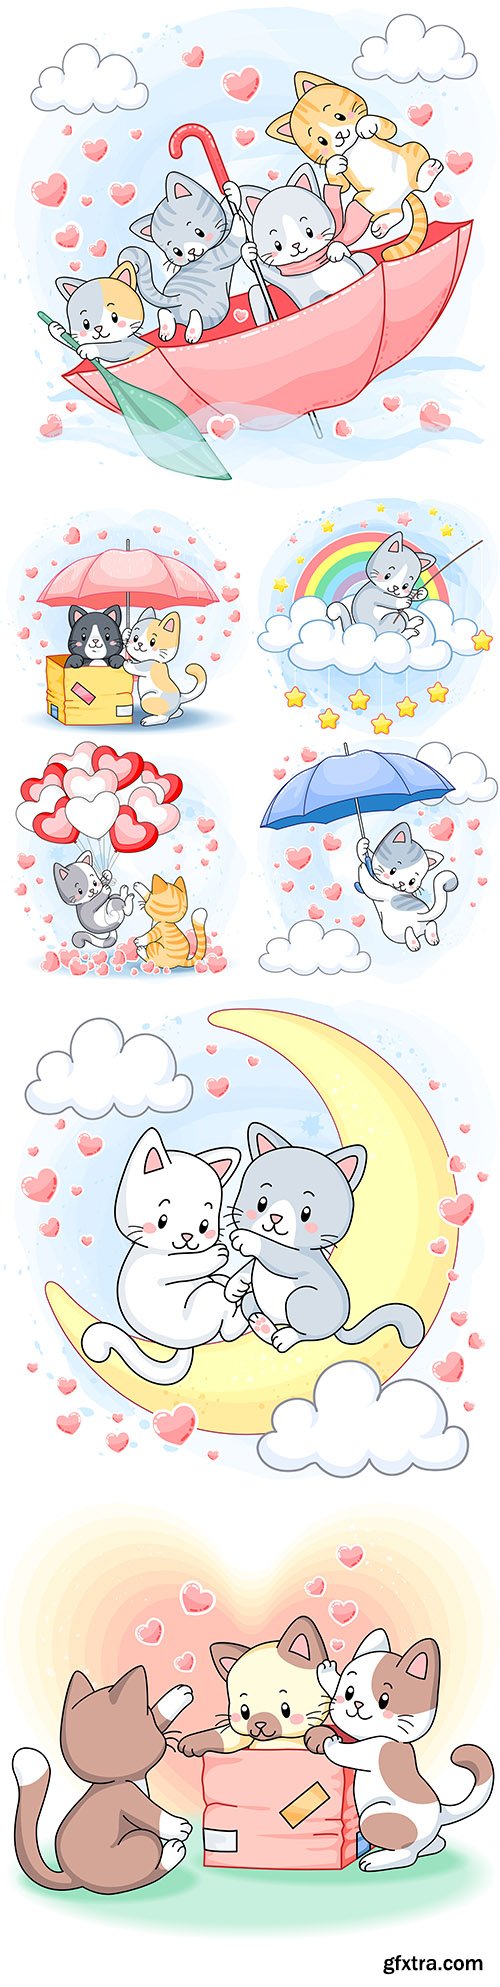 Nice funny kittens with umbrella and hearts illustration
